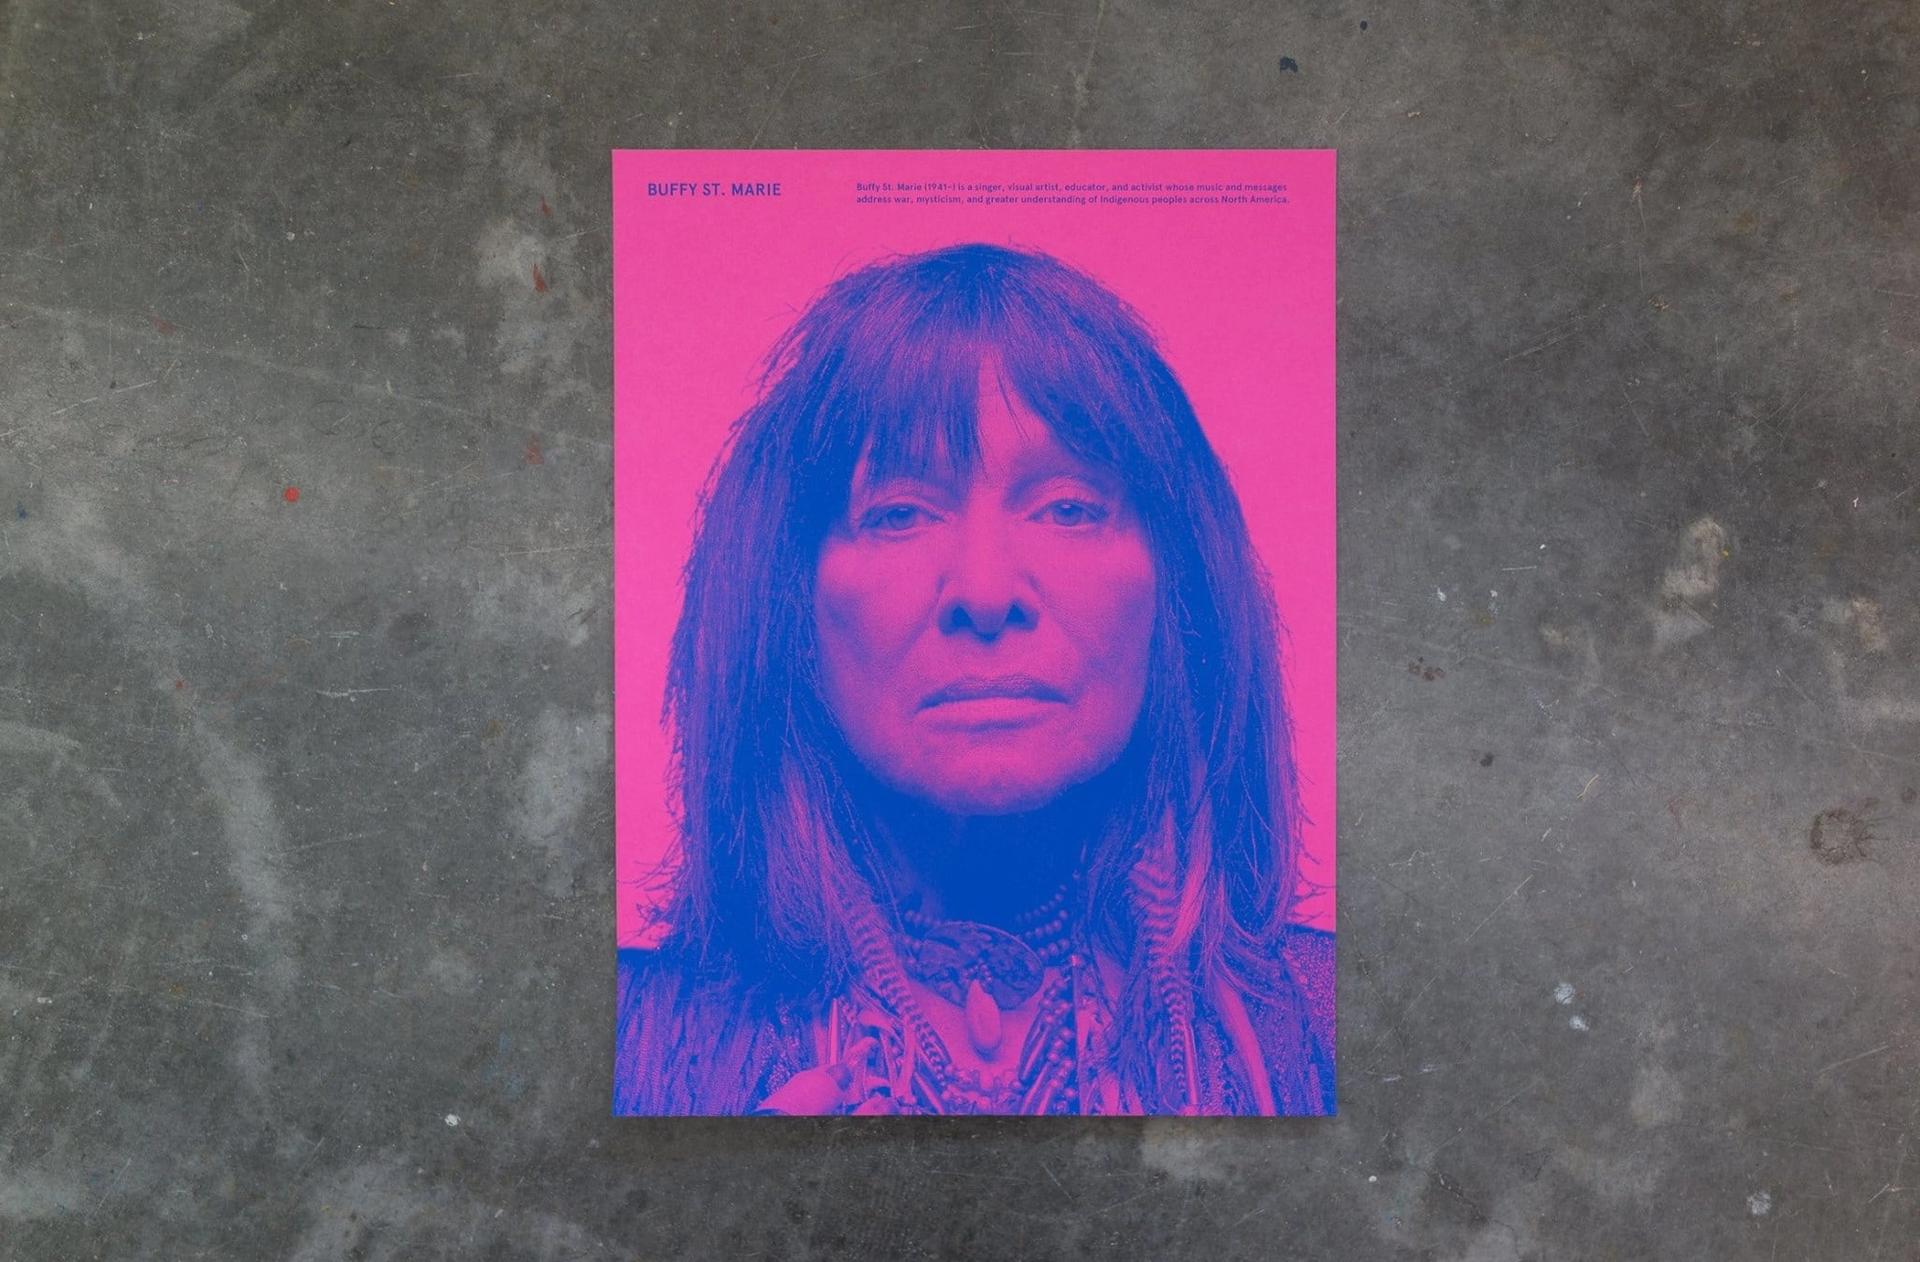 Buffy St. Marie in the Unsung Heroes Portrait Series by Facebook's Analog Research Lab.